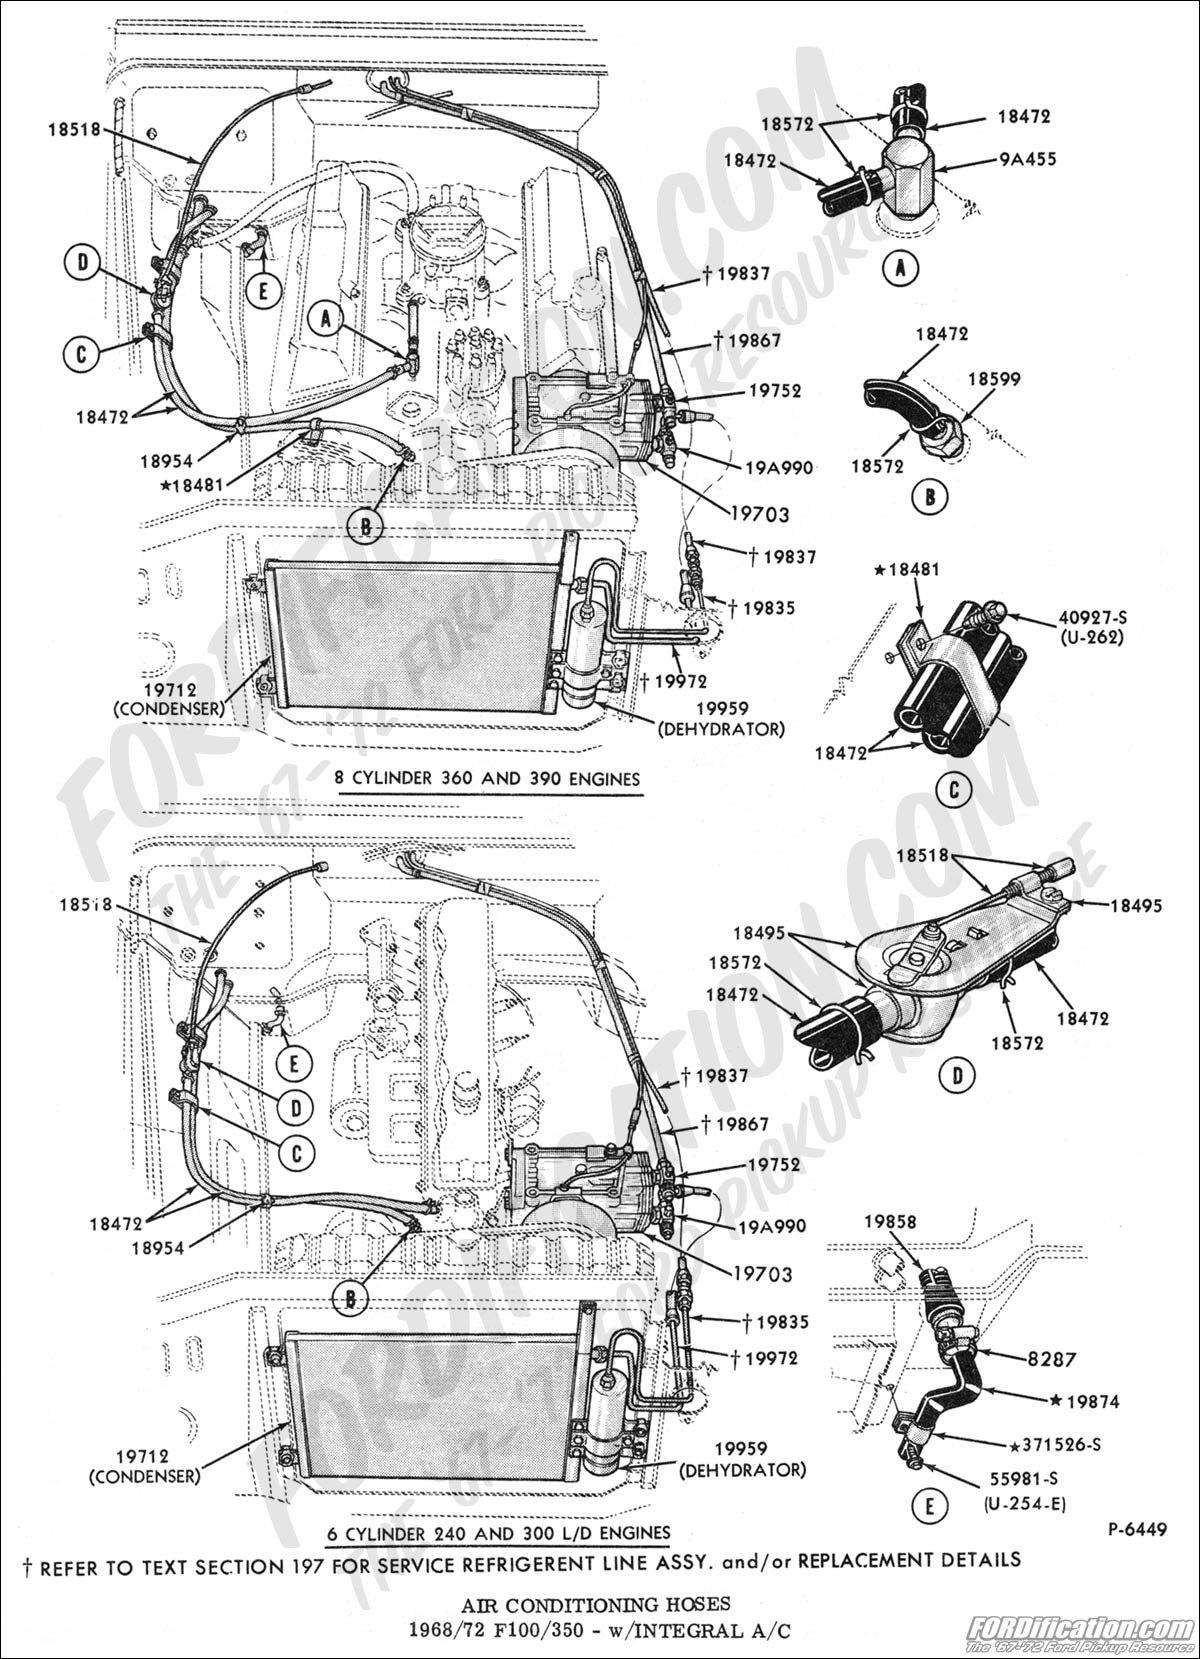 Ford explorer air conditioning schematic #9